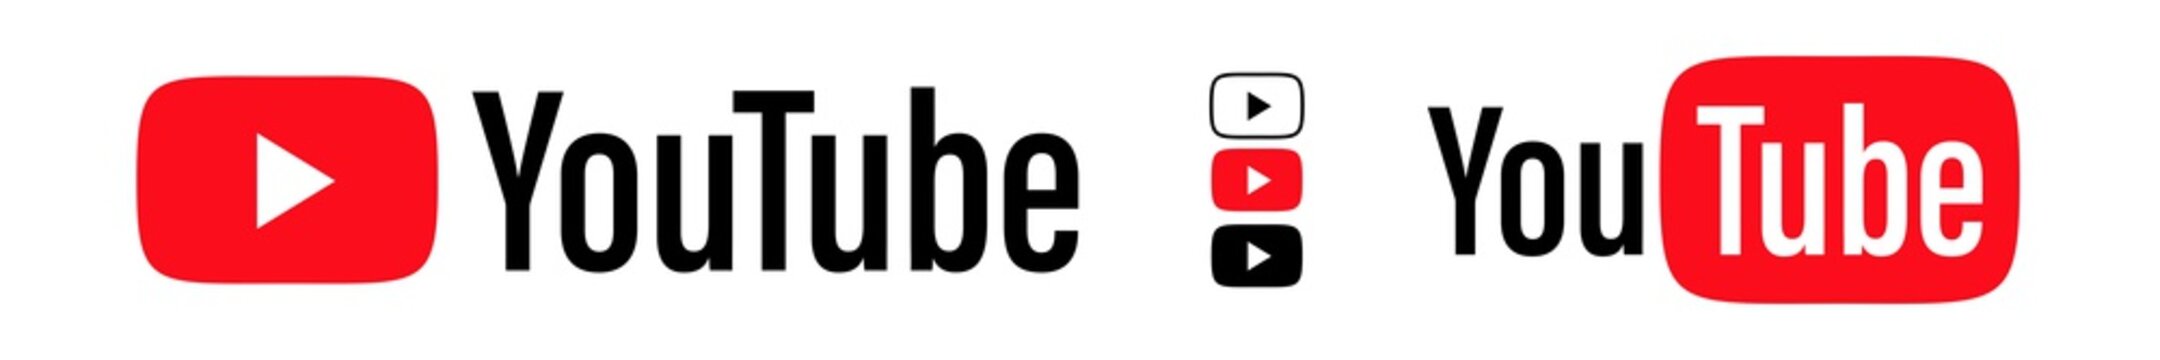 Youtube Logo Icon Play Button. Video Social Media App Symbol Isolated You Tube On White Background